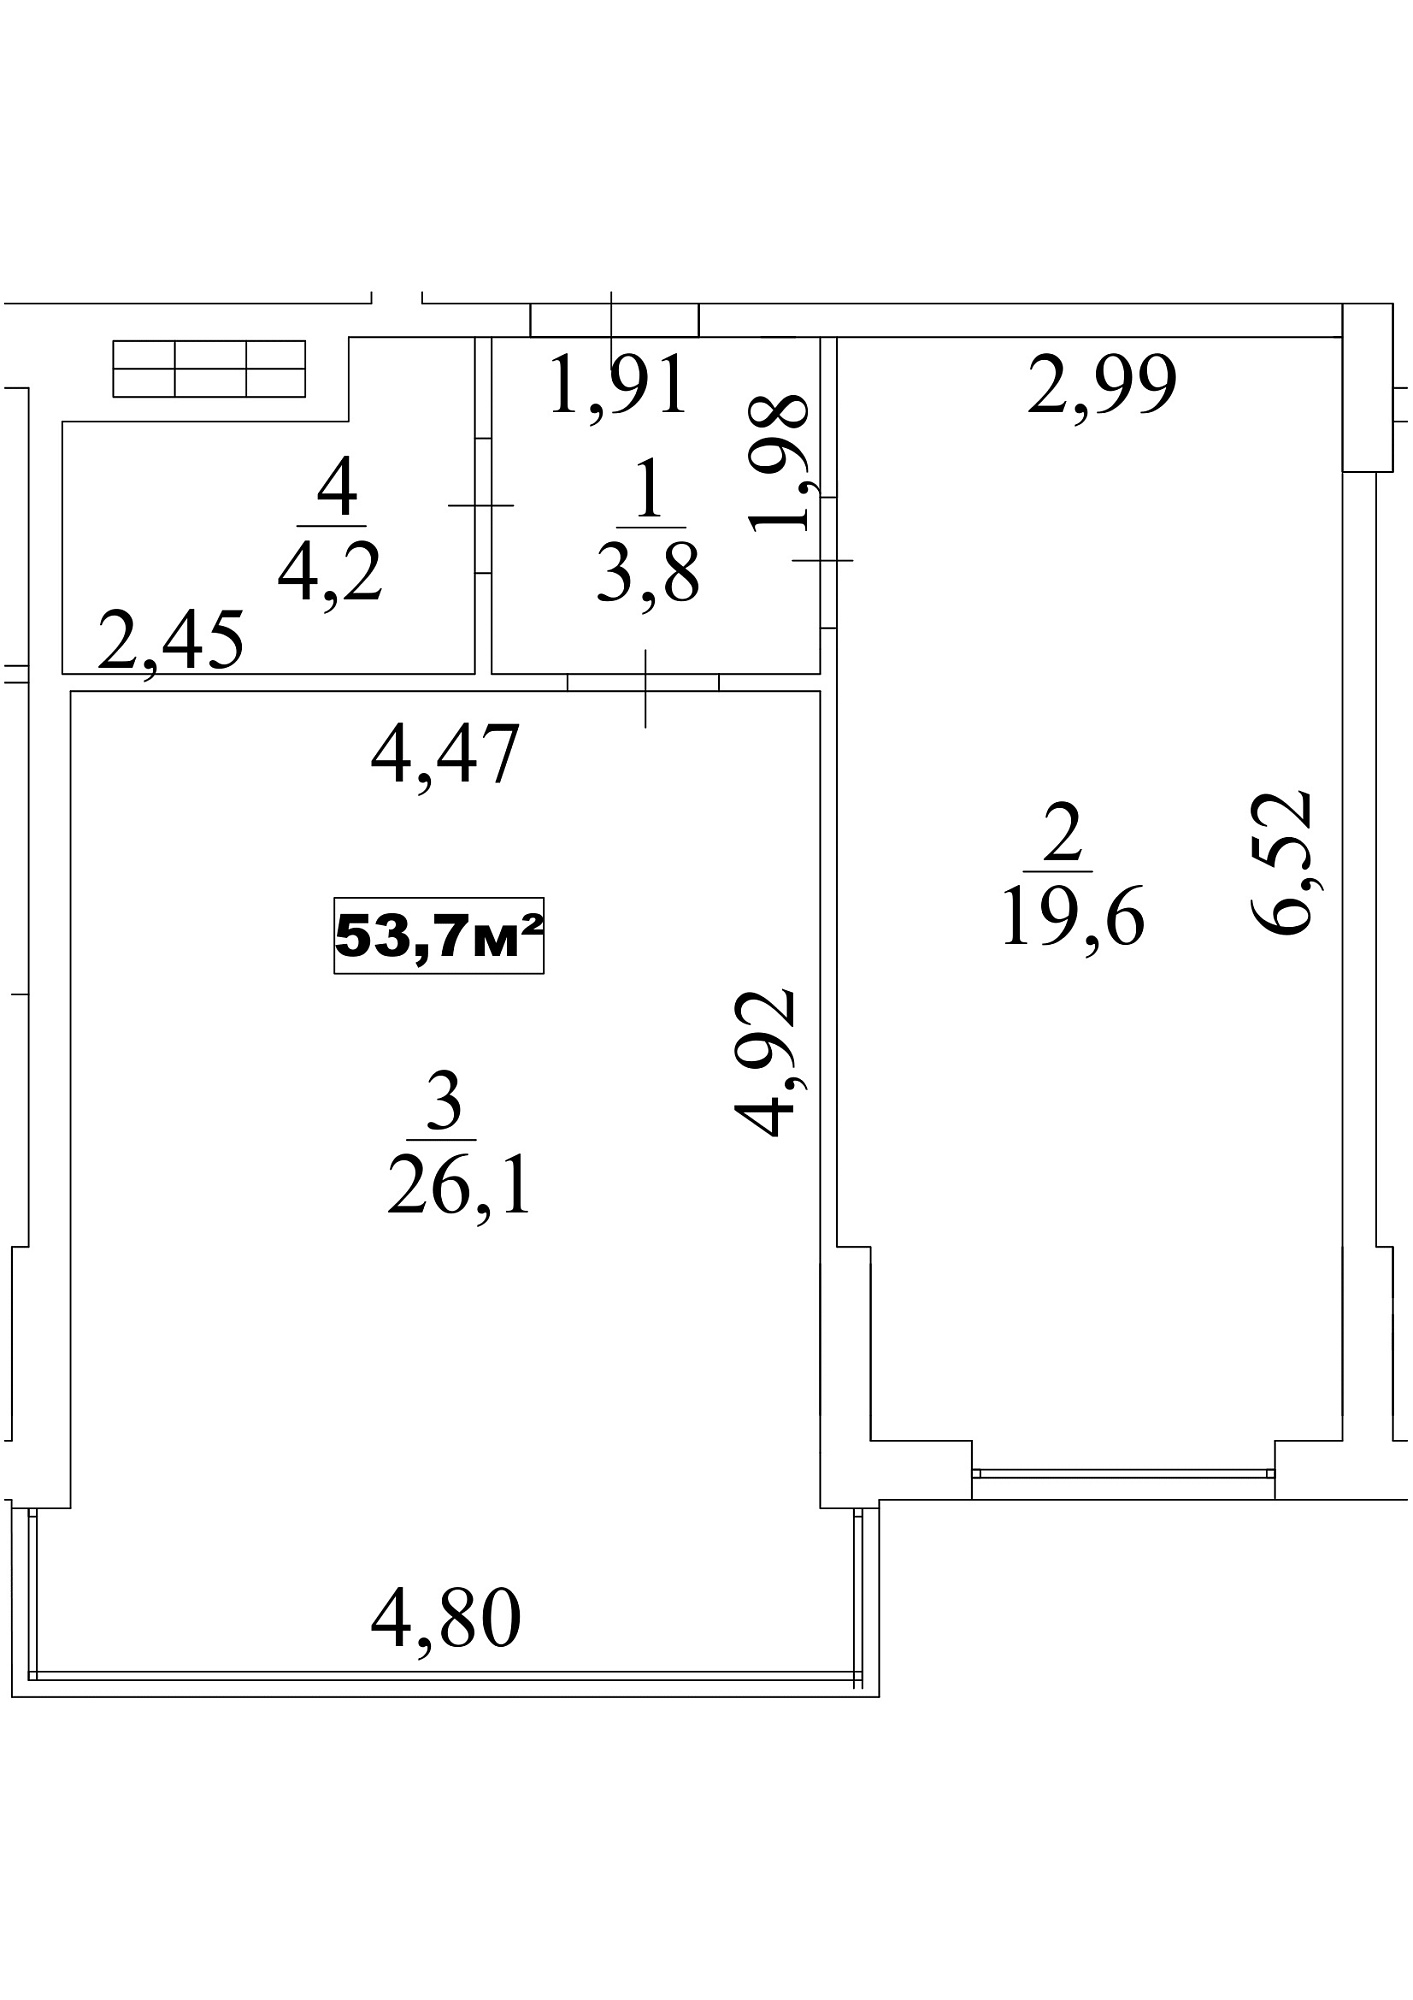 Planning 1-rm flats area 53.7m2, AB-10-08/00071.